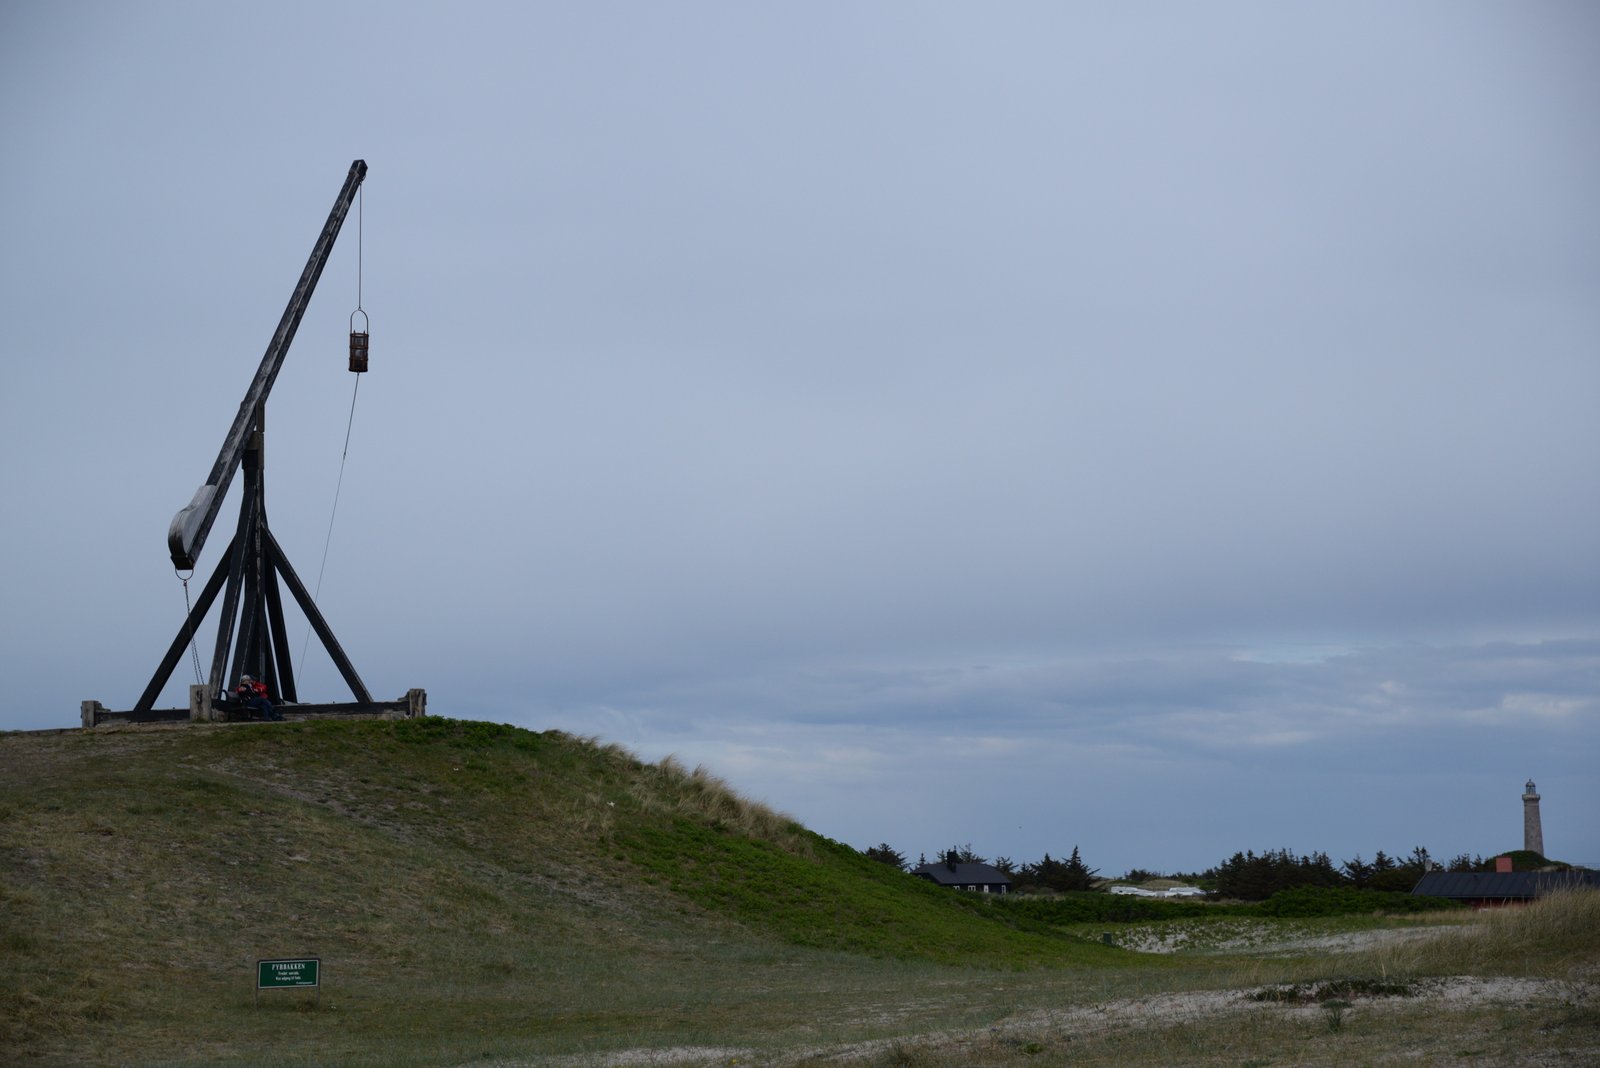 The oldest "lighthouse" in Skagen: A fire was lit in the basket, and lifted up, so it could be seen from the sea.